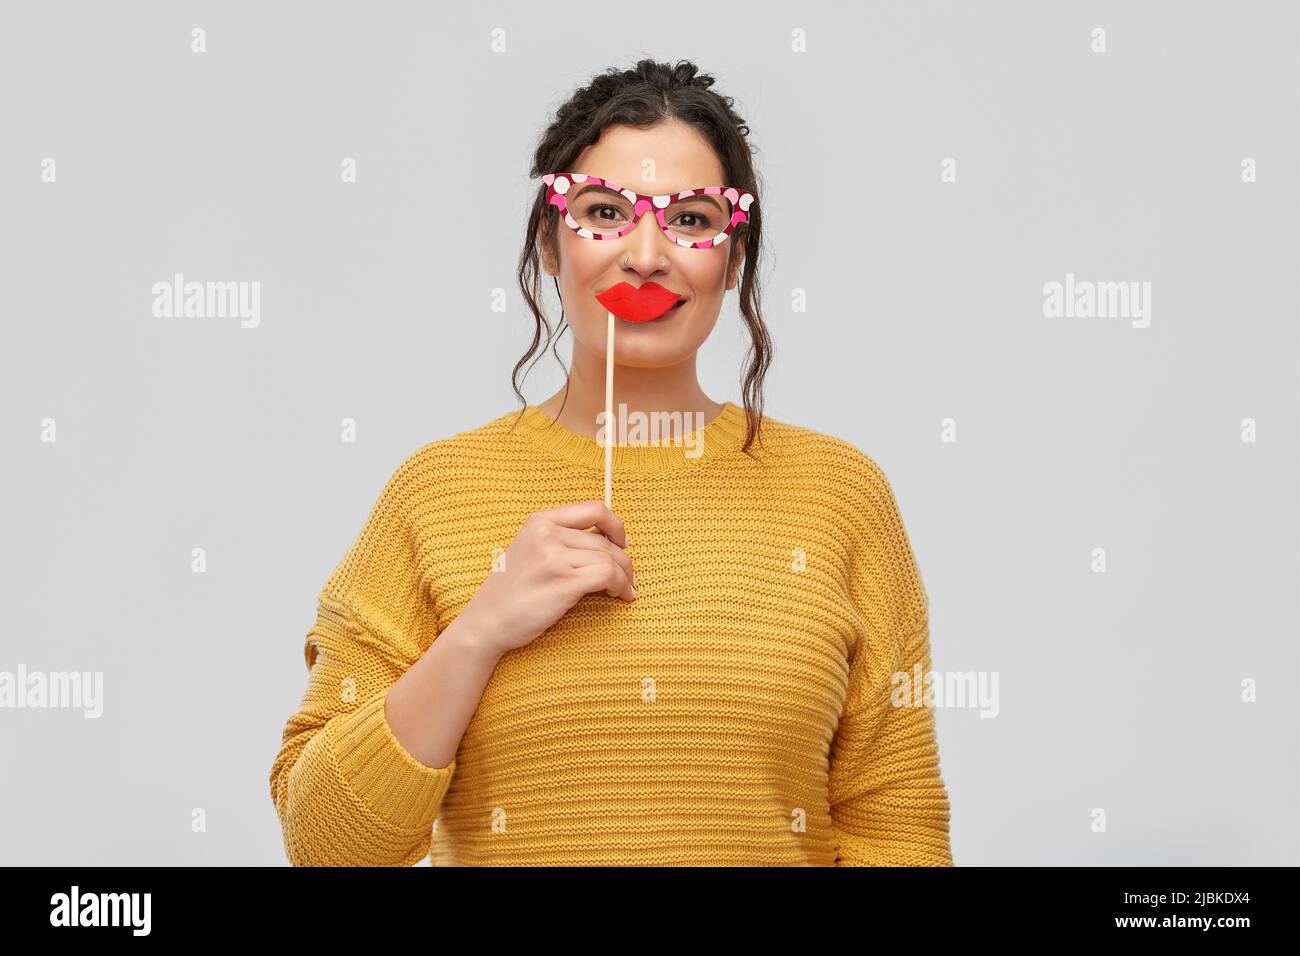 happy young woman with big glasses and lips Stock Photo